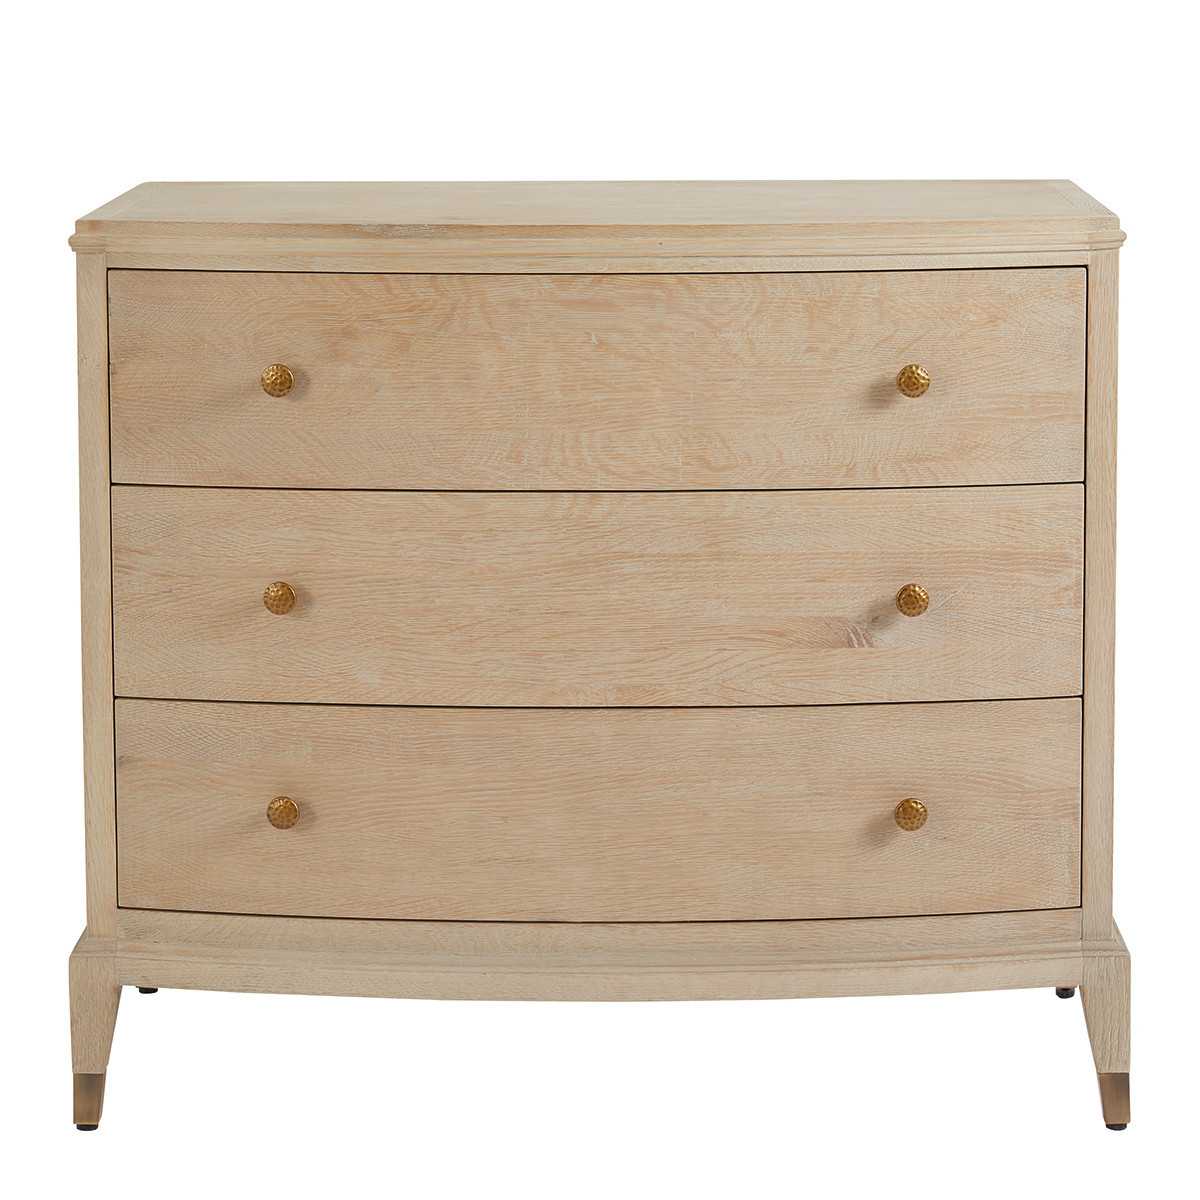 Bleached INES chest of drawers